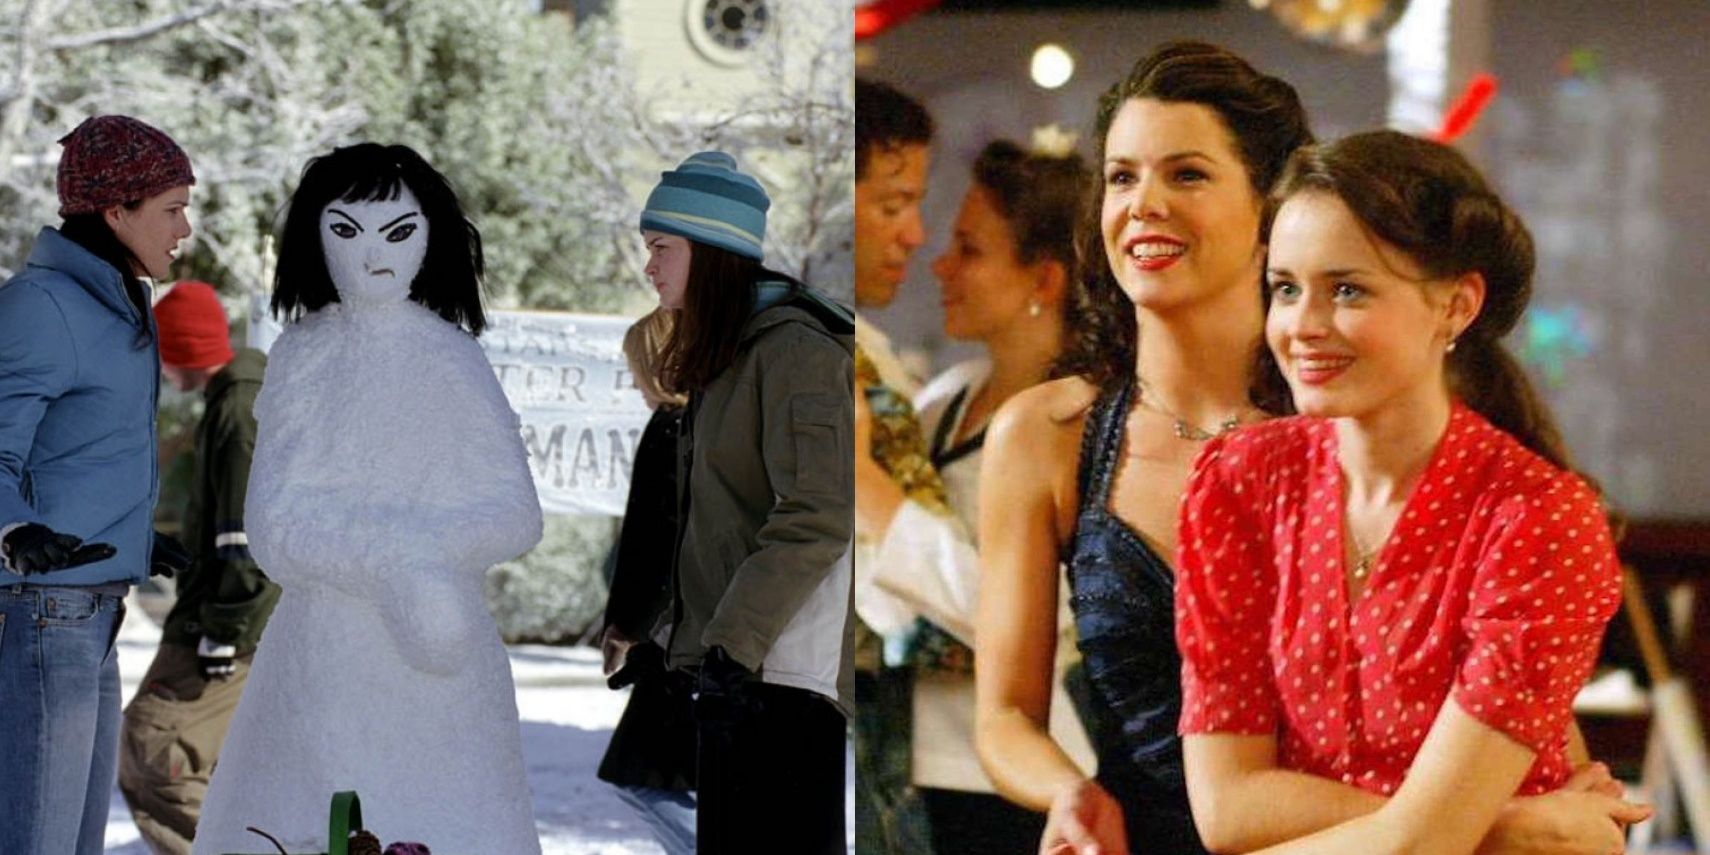 Lorelai and Rory Gilmore building a snowman; Lorelai and Rory participating in the 24-hour dance marathon in &quot;Gilmore Girls.&quot;